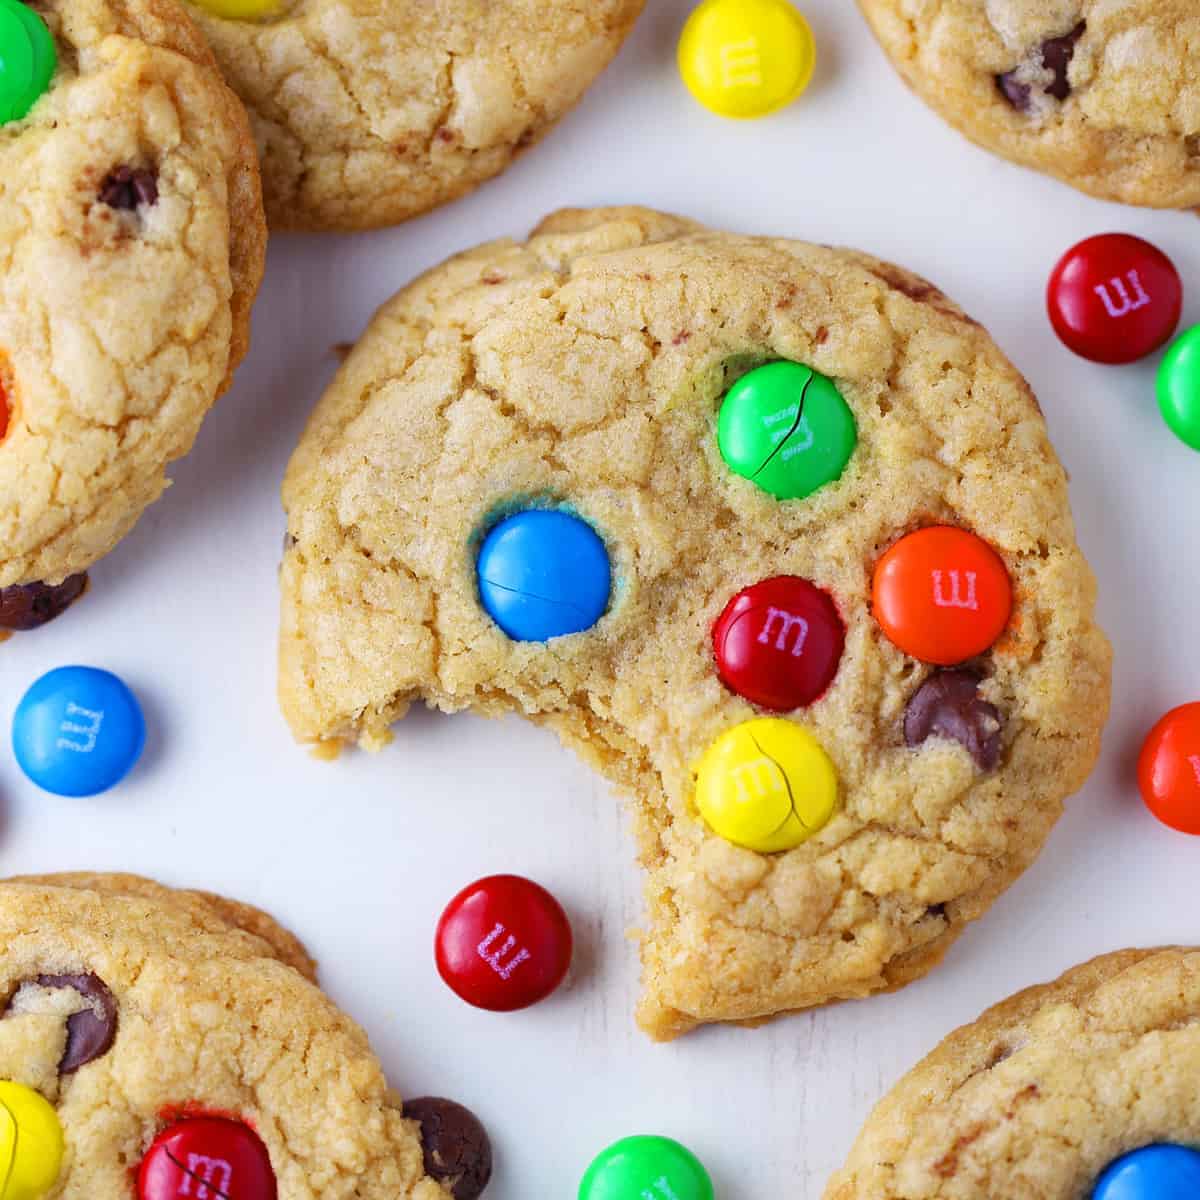 Chewy Chocolate M&M Cookies » the practical kitchen